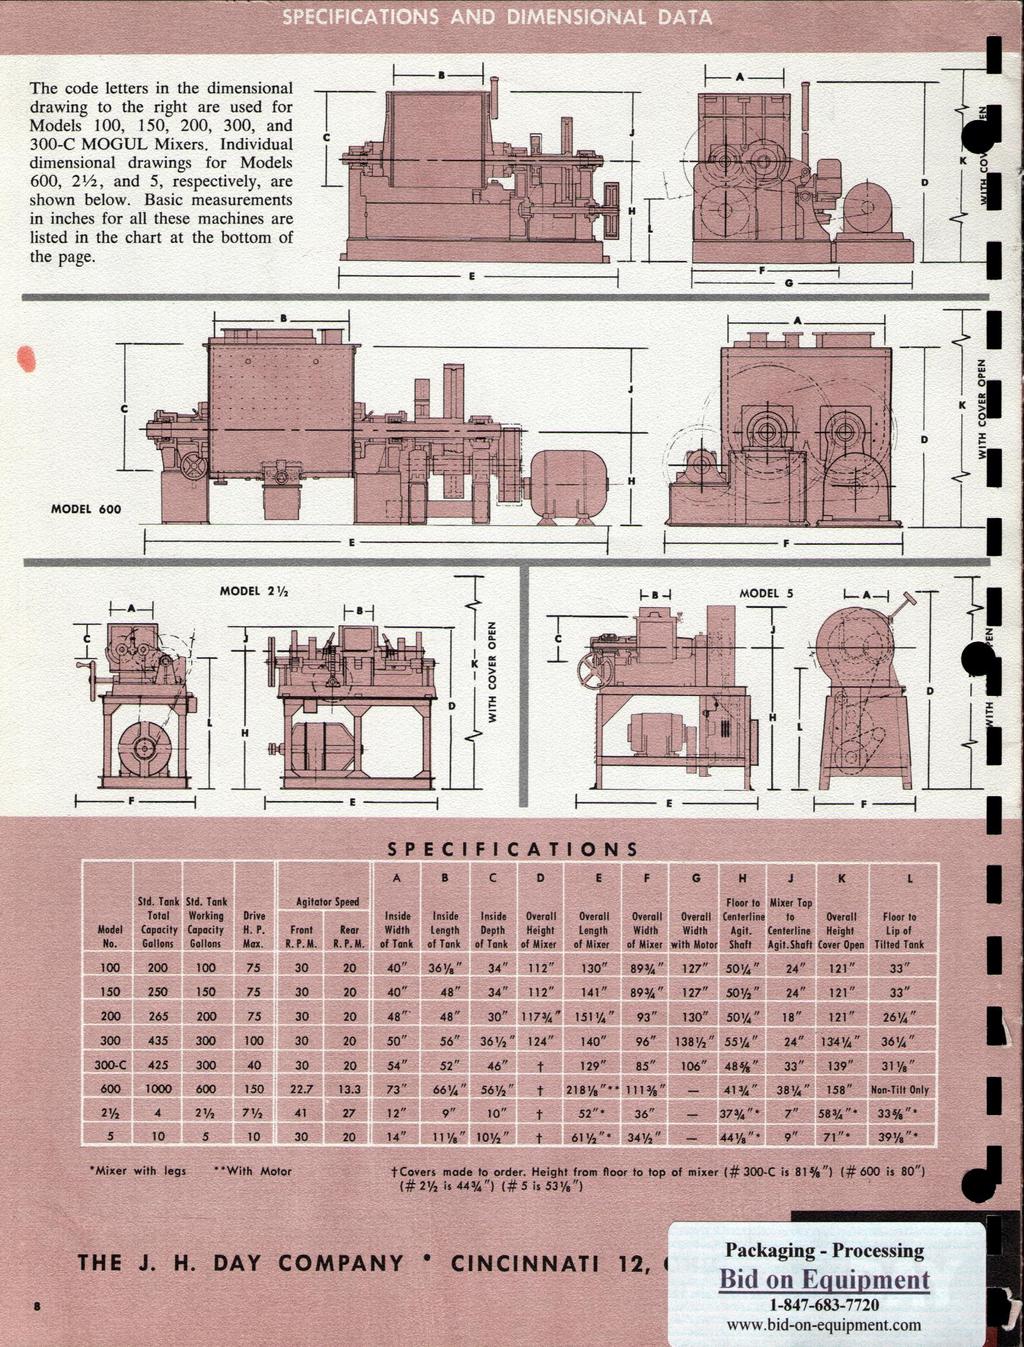 The code letters in the dimensional drawing to the right are used for Models 100, 150, 200, 300, and 300-C MOGUL Mixers.